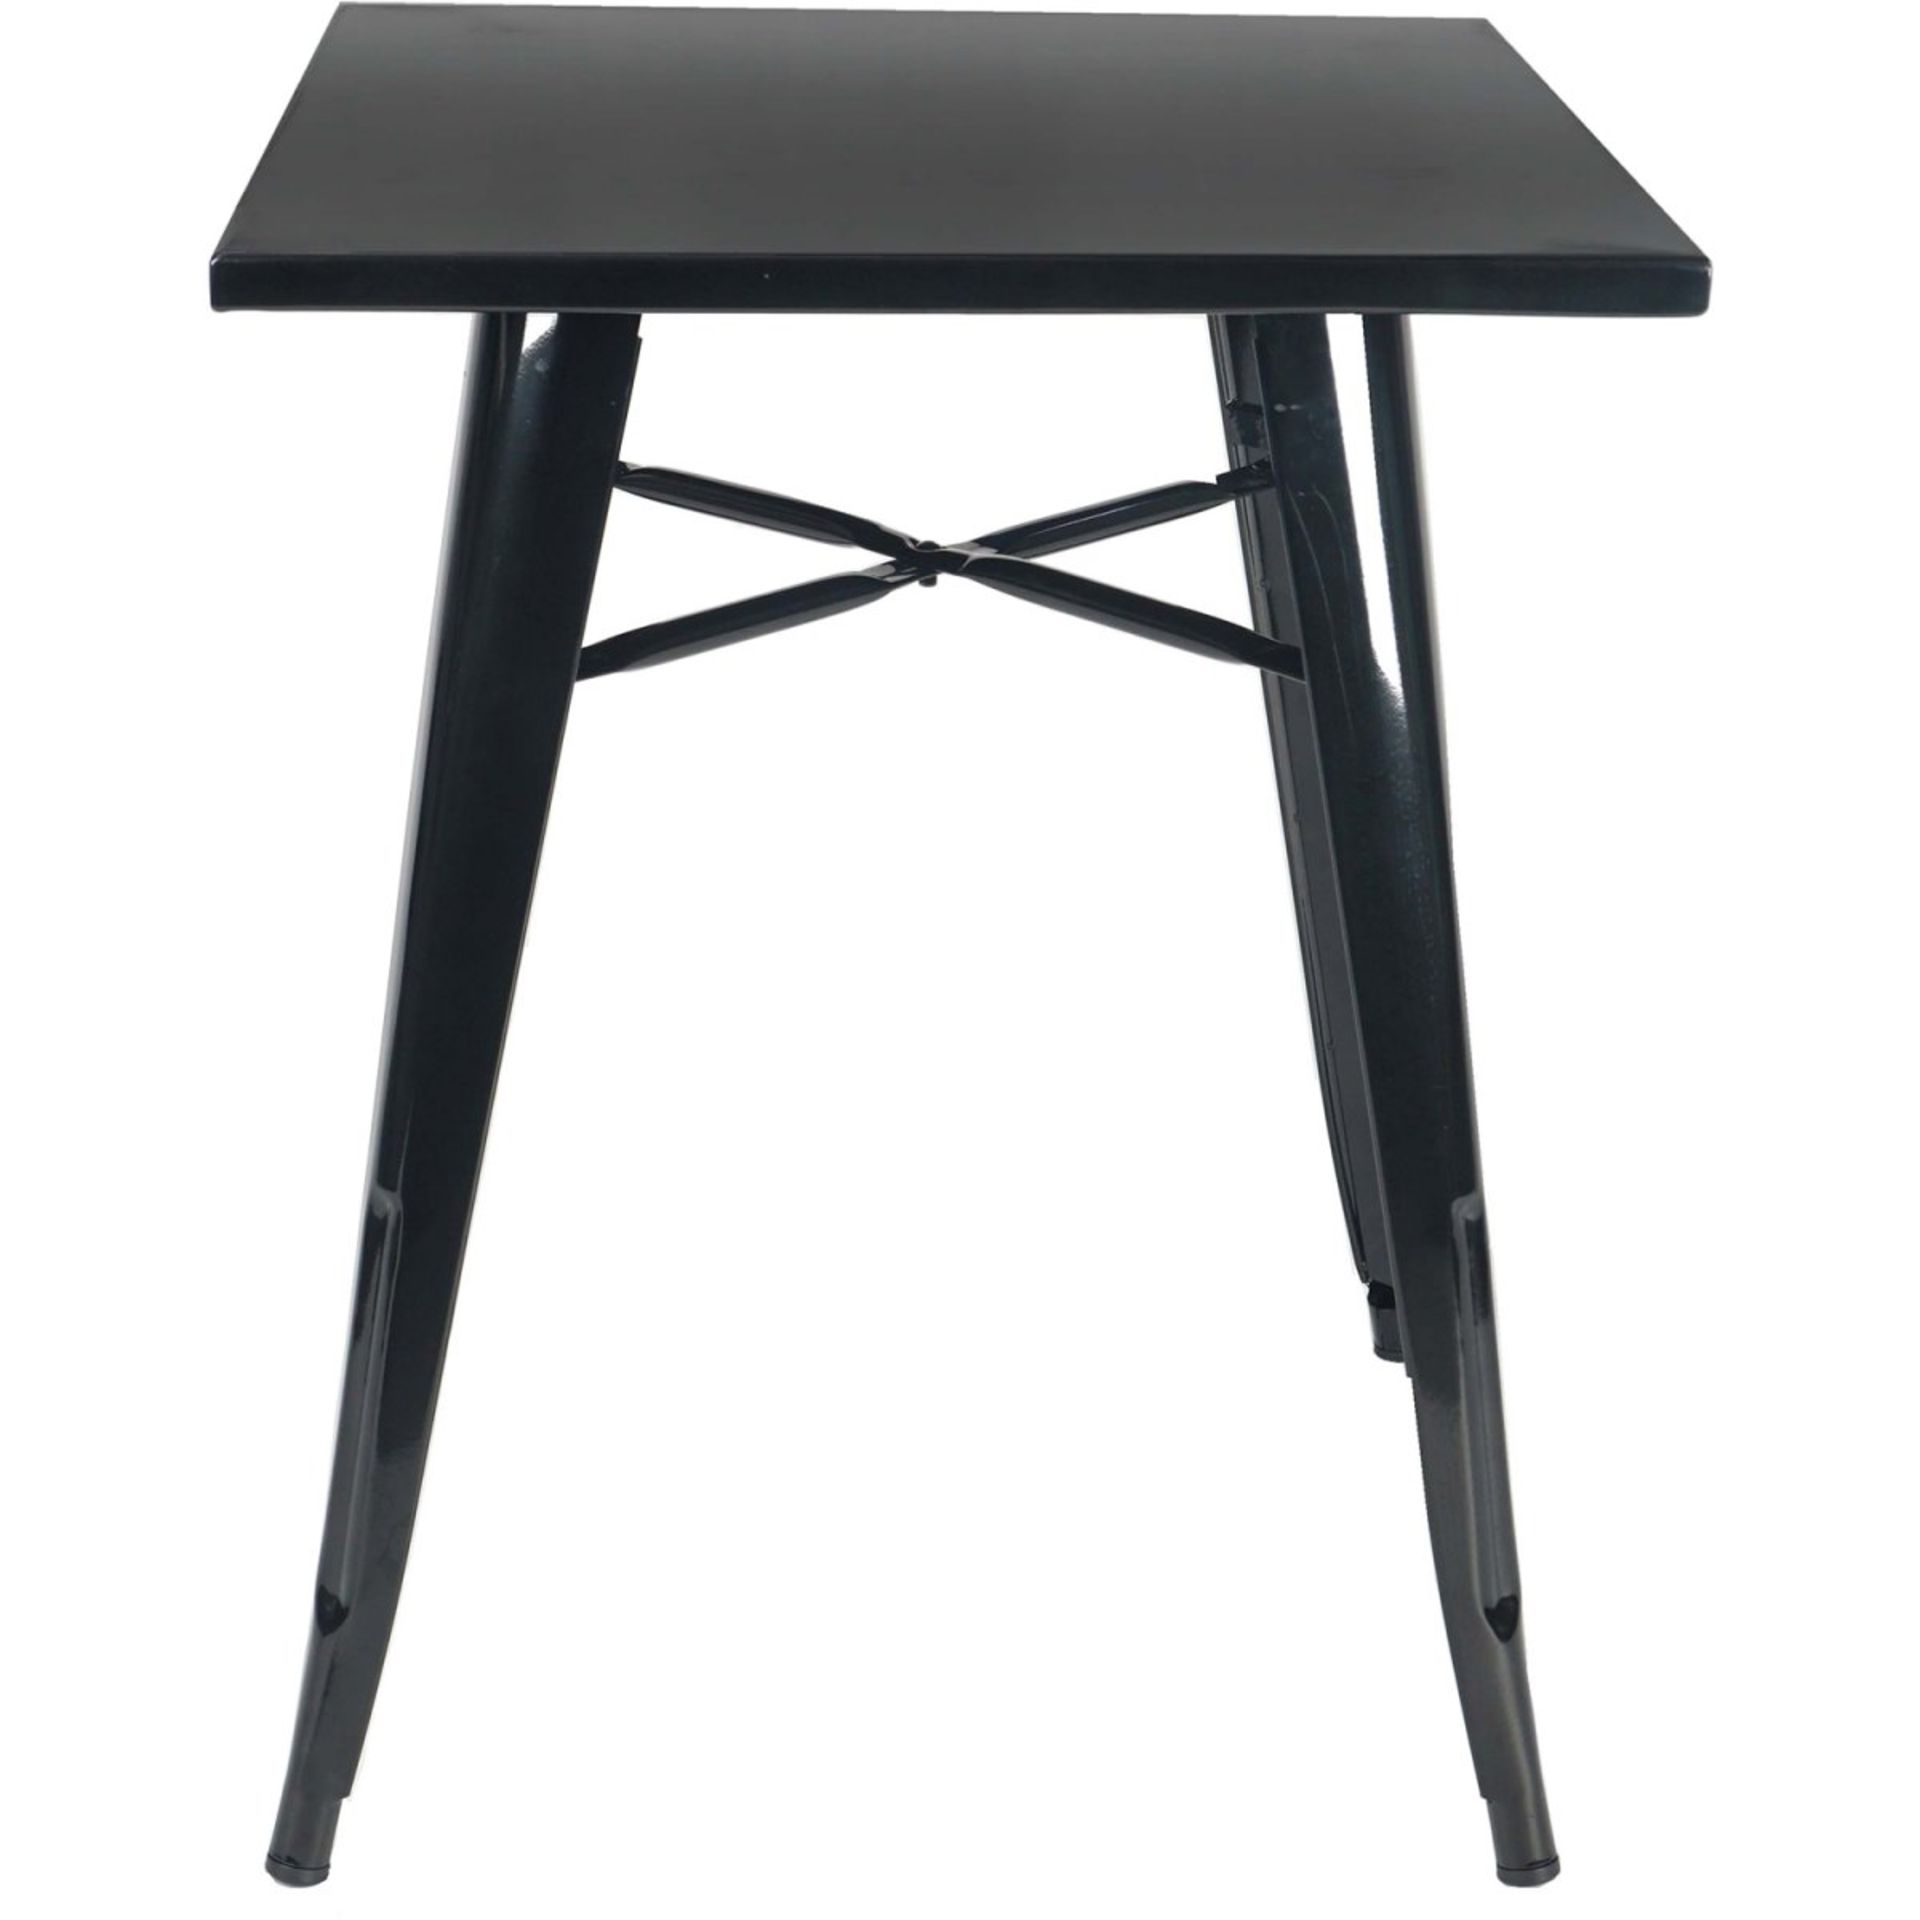 1 x Tolix Industrial Style Outdoor Bistro Table and Chair Set in Black - Includes 1 x Table and 4 - Image 5 of 11